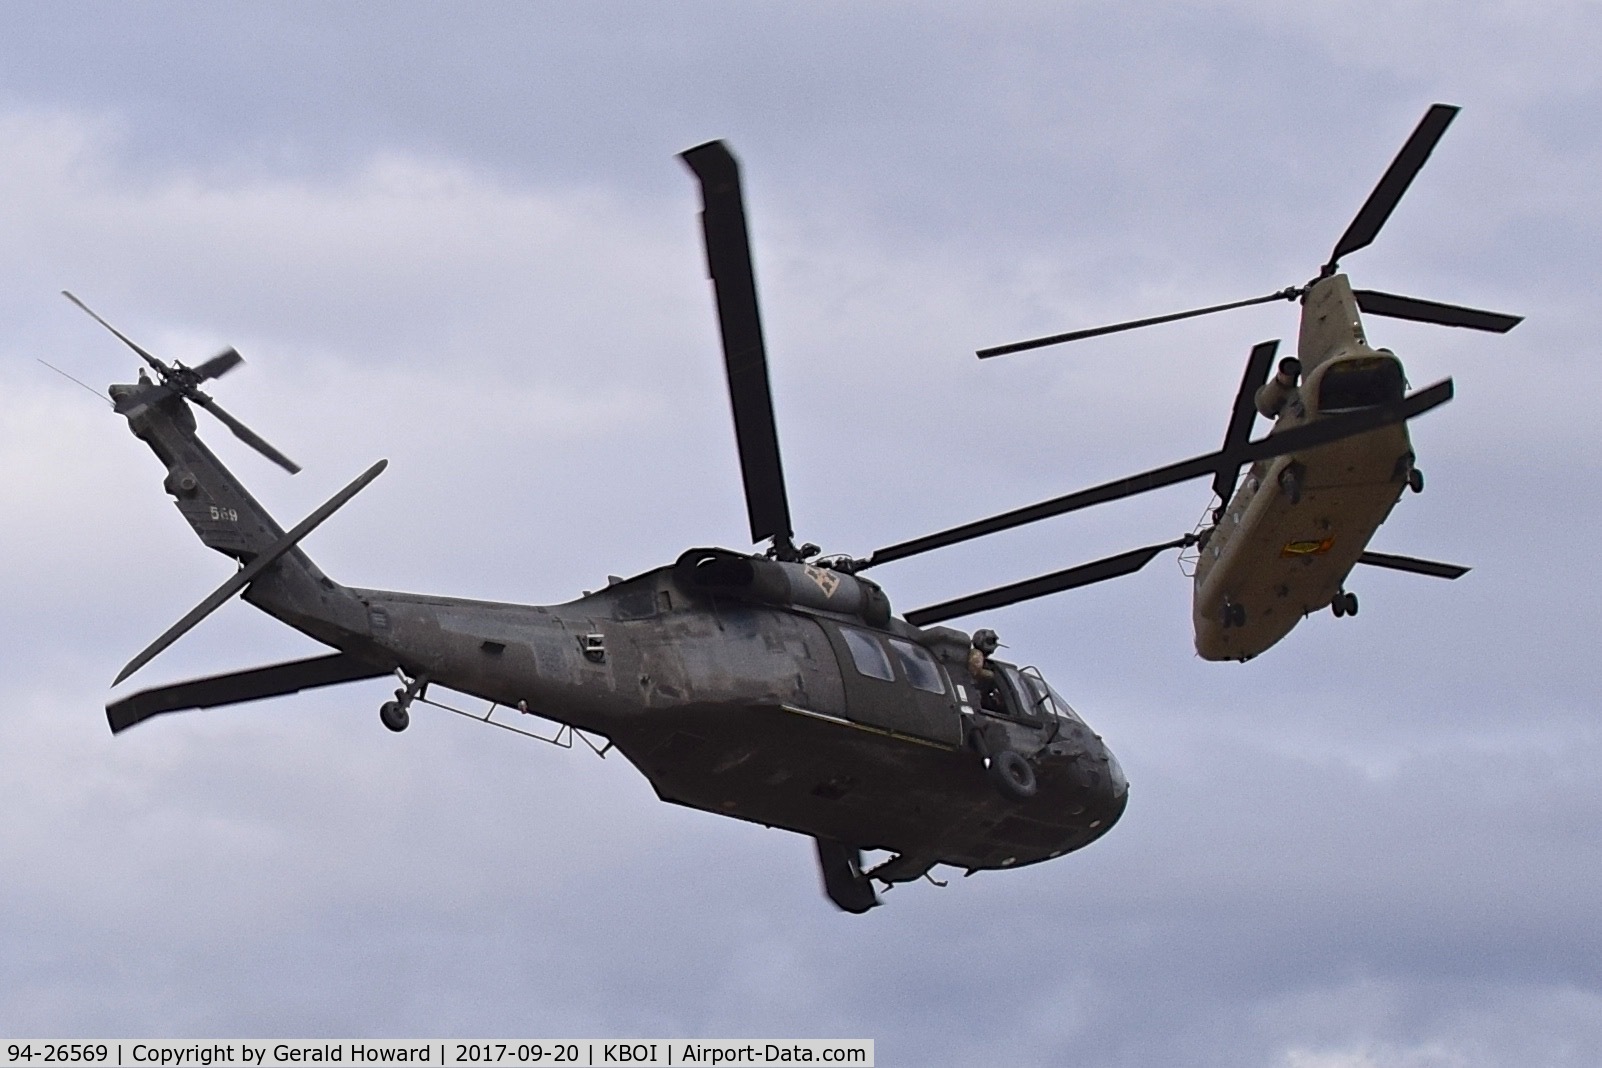 94-26569, 1994 Sikorsky UH-60L Black Hawk C/N 70.2089, Following CH-47 Chinook #15-08188 on take off from BOI.